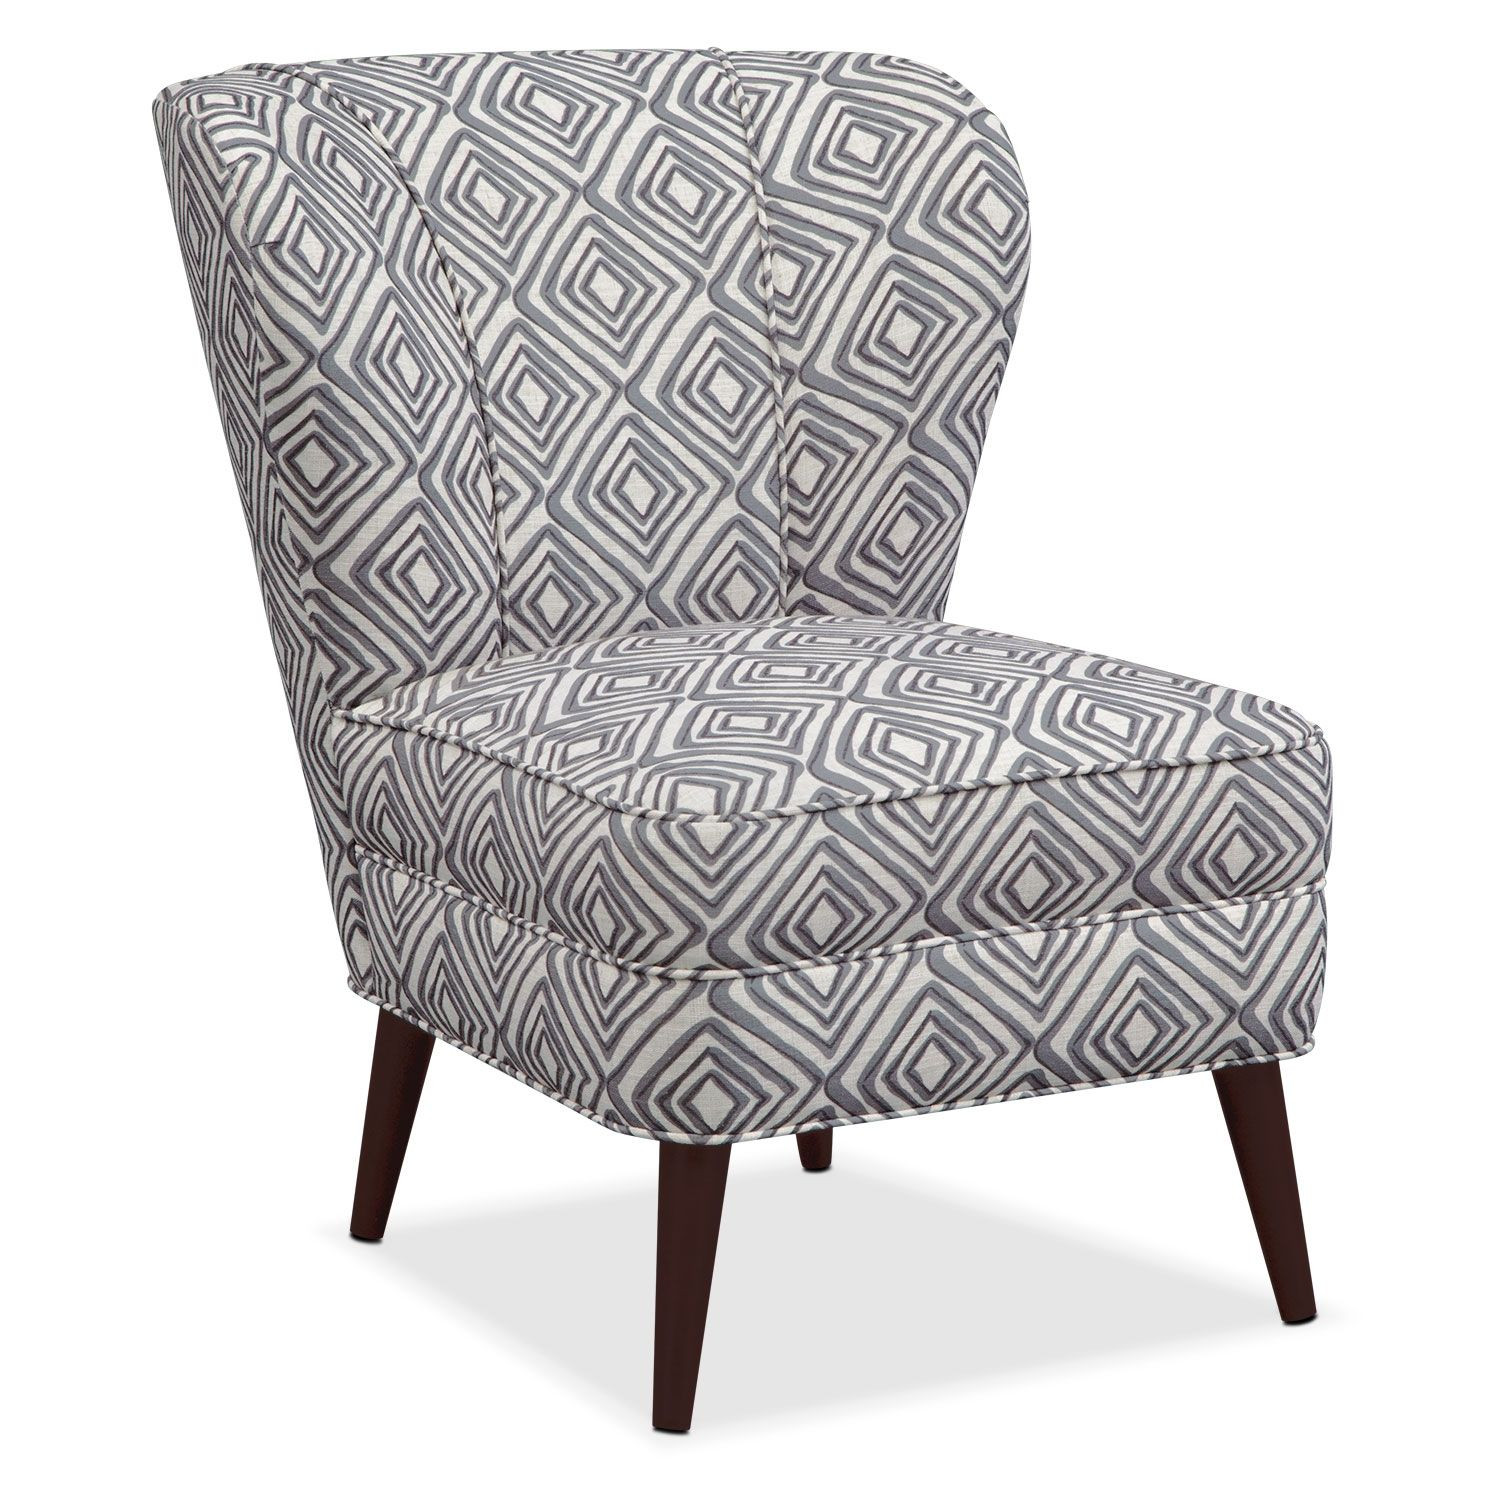 Printed Living Room Chairs
 Living Room Furniture Jules Accent Chair Print